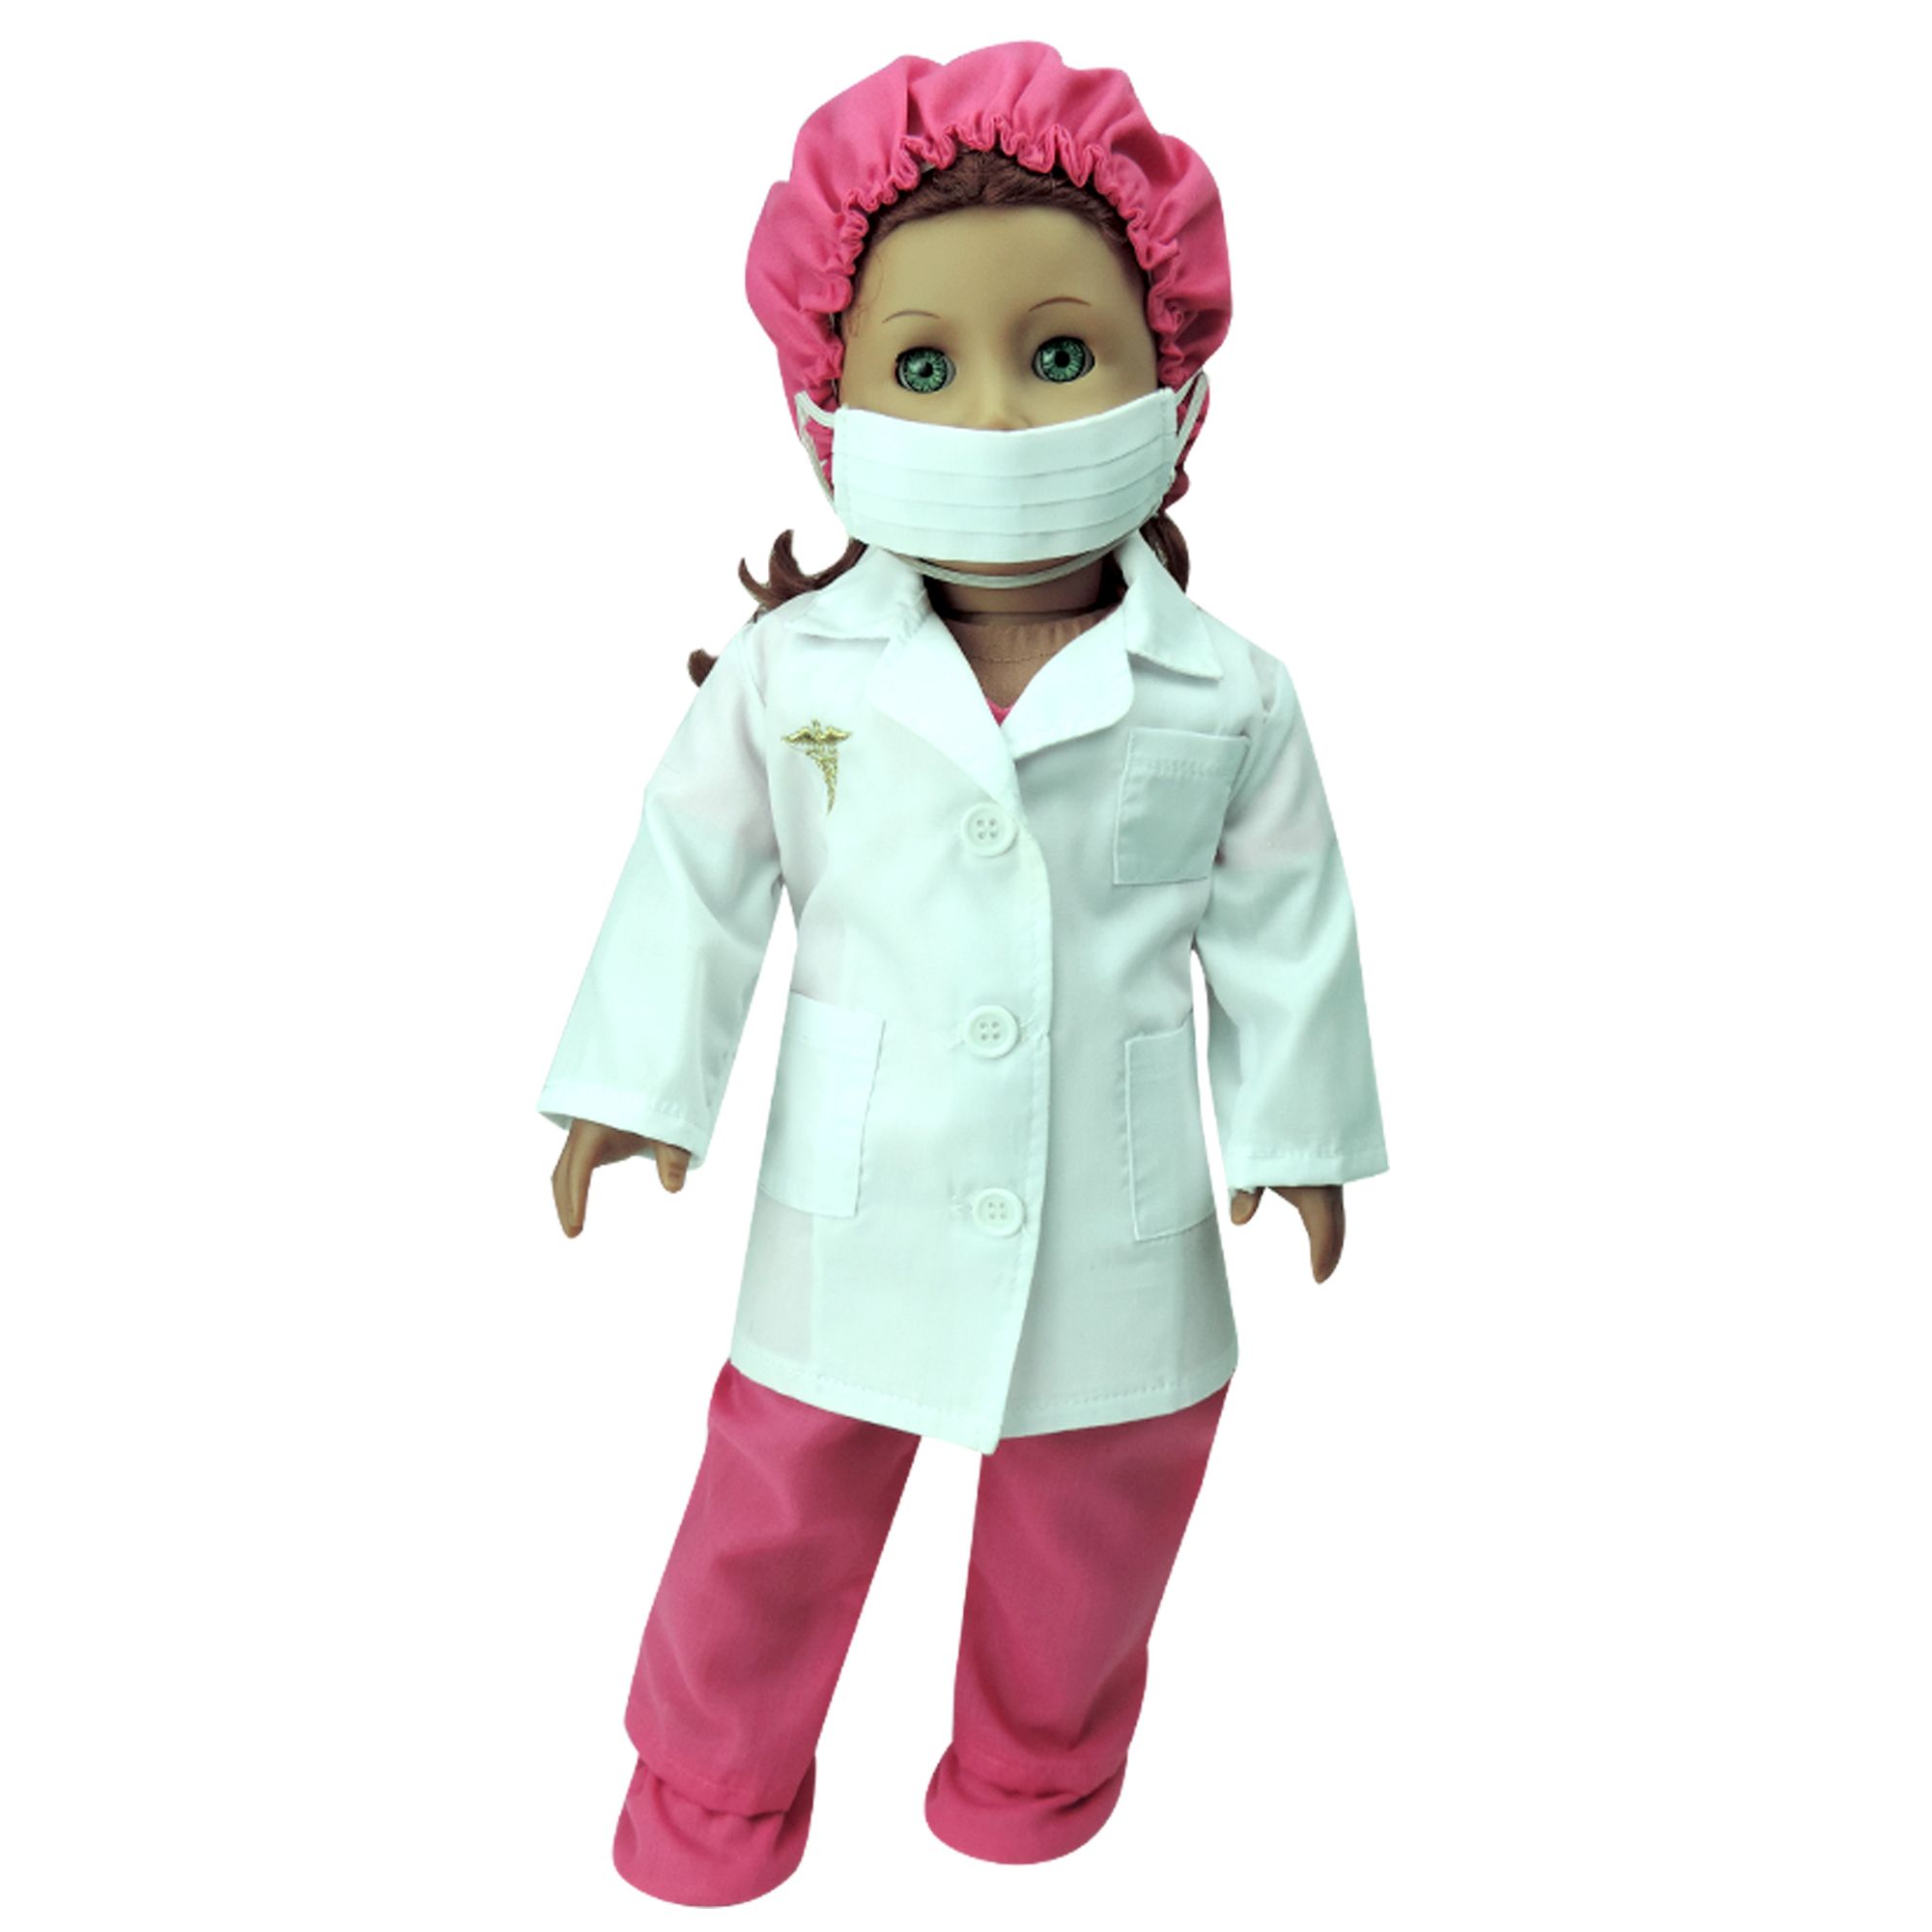 Doctor costume for kids Scrubs pants with accessories set toddler 5-6T Pink